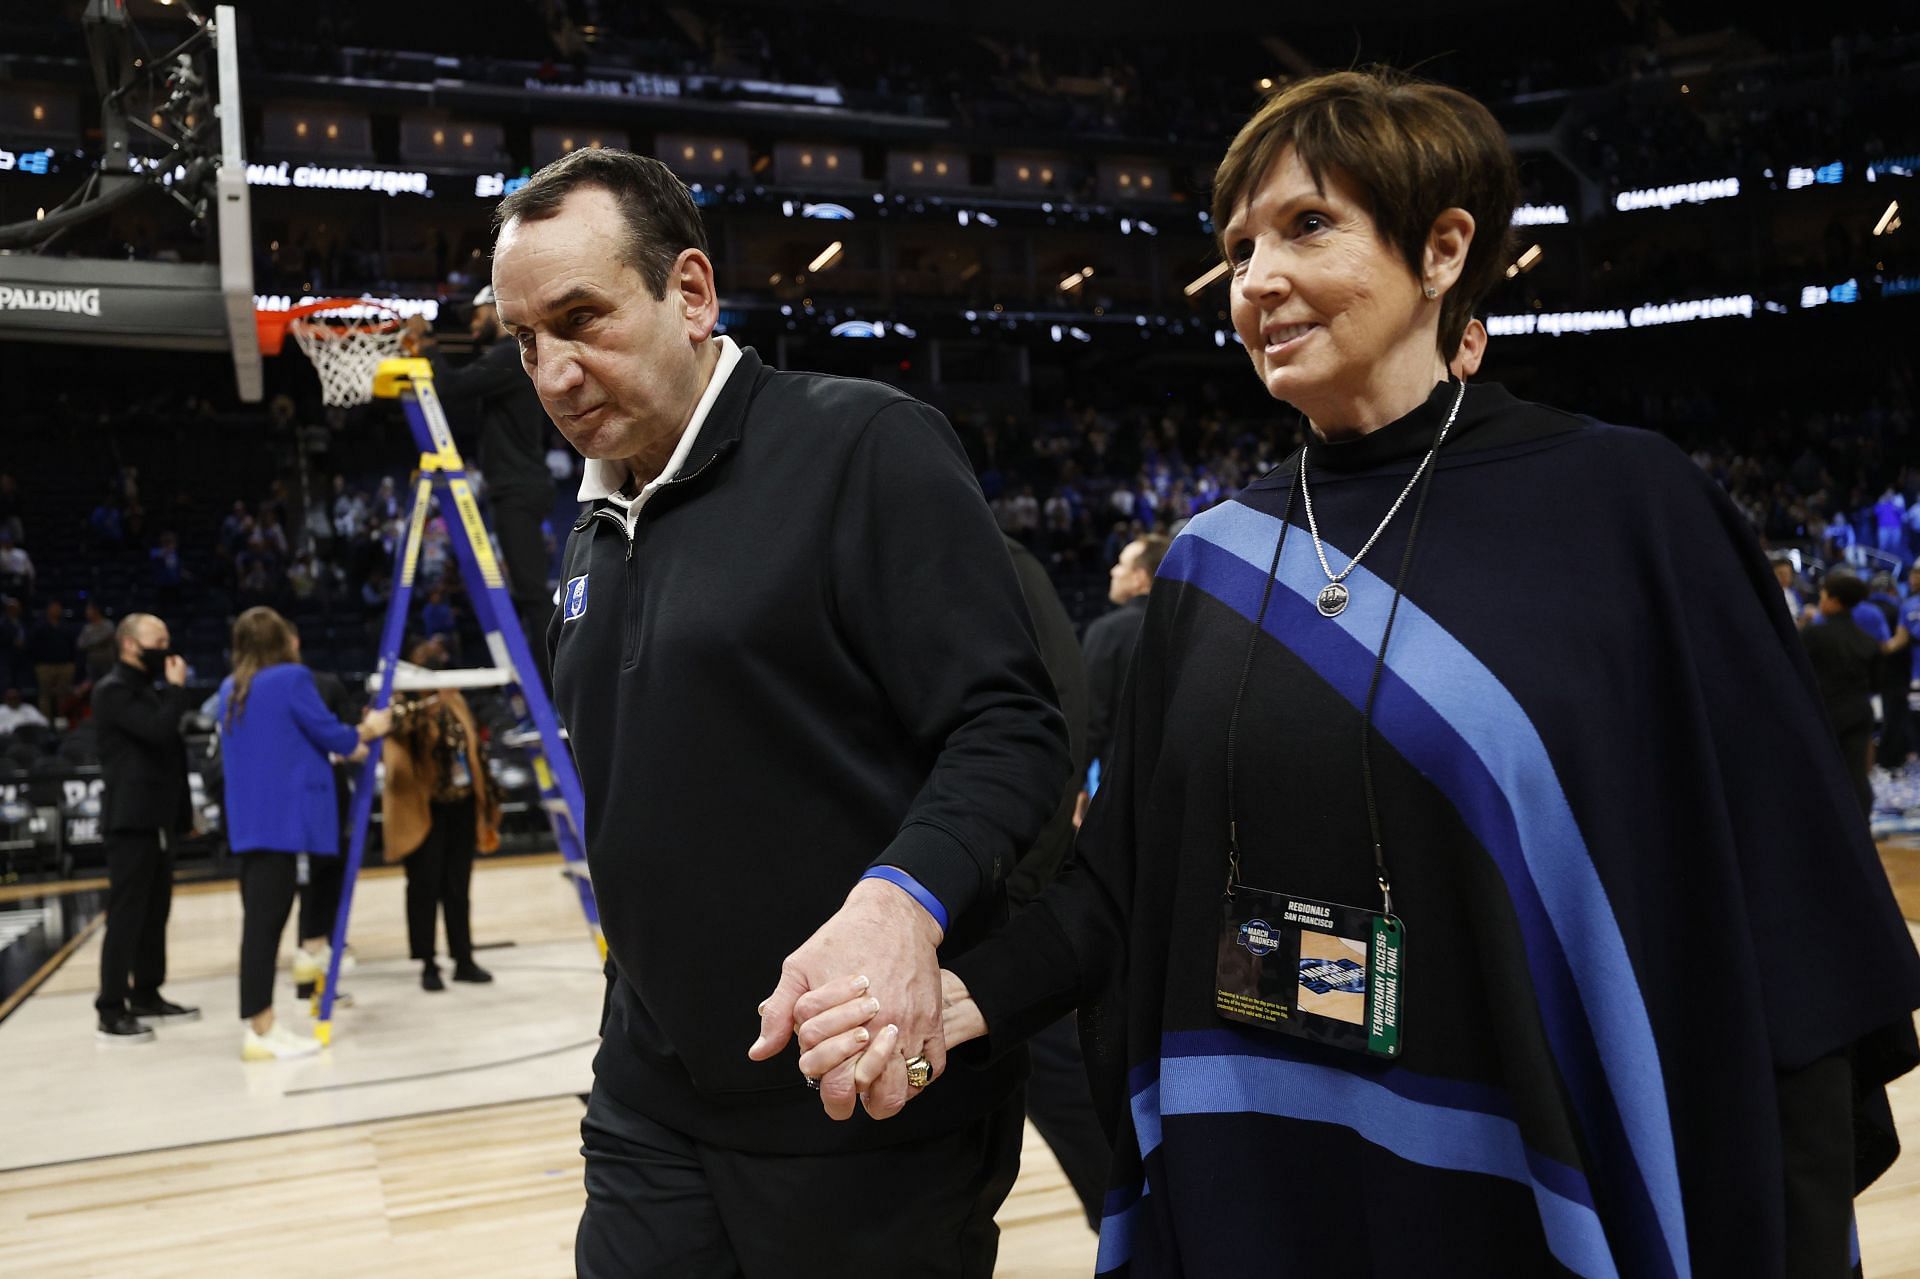 Coach K and his wife, Mickie, will walk off into the sunset regardless of the results in the Final Four.